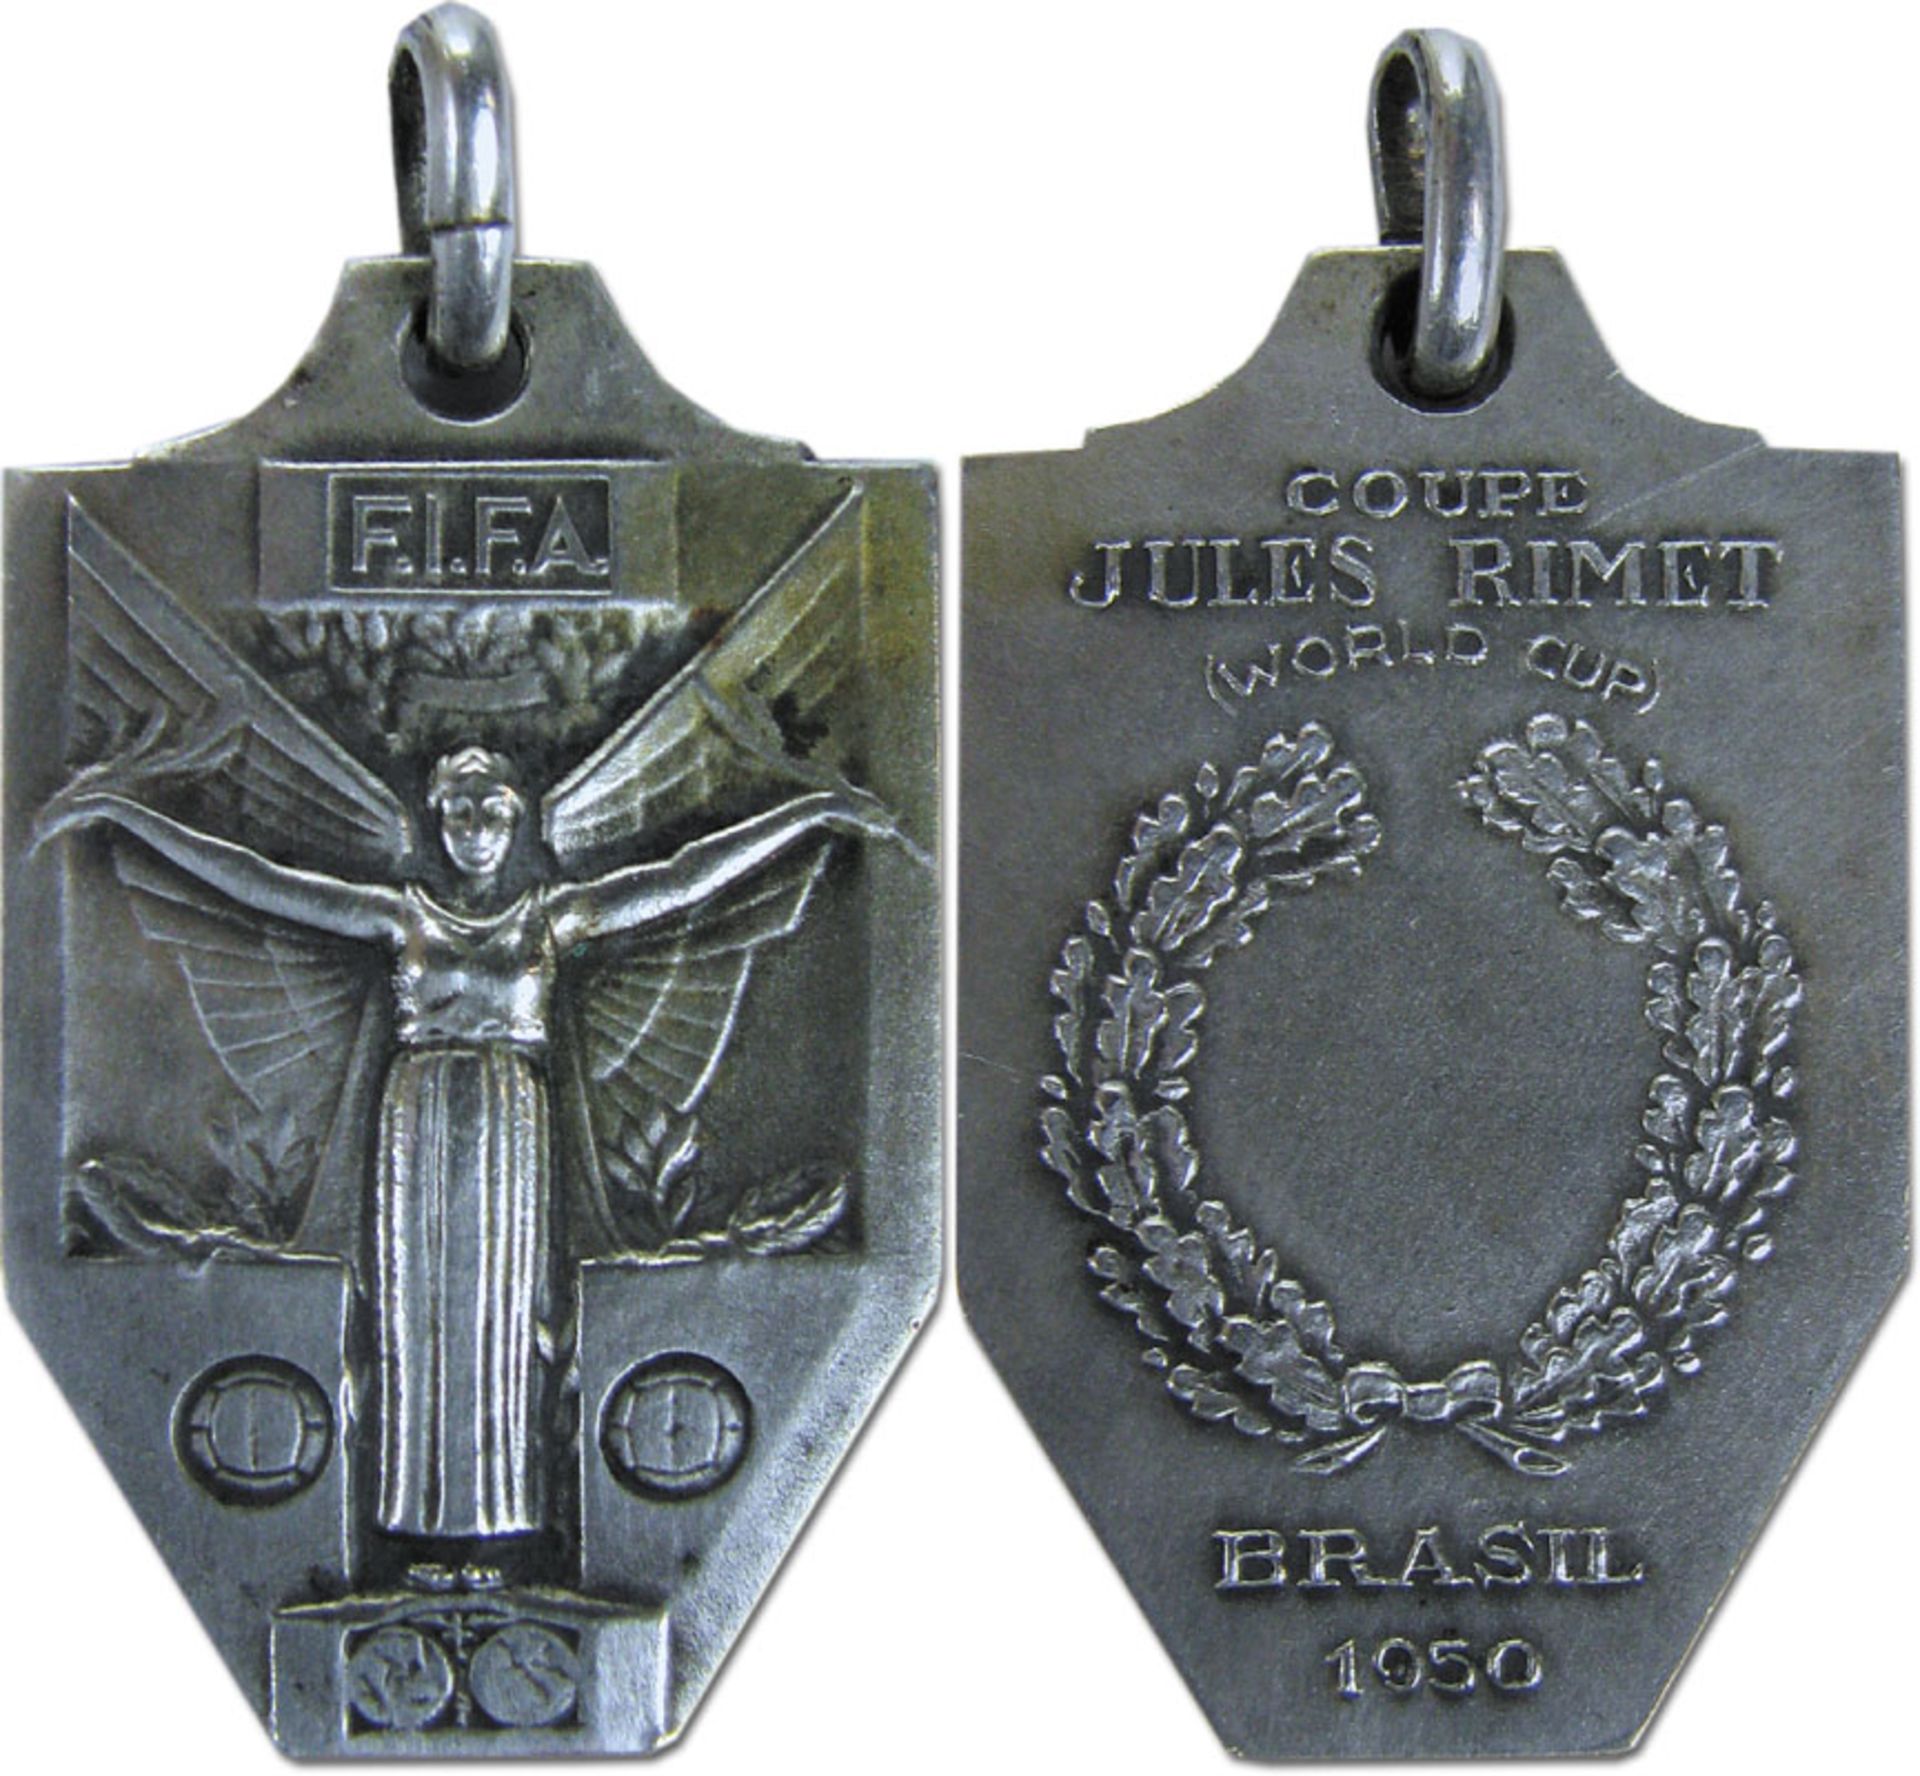 FIFA World Cup 1950. Winner medal - Official winner medal for the 2nd to the fourth place at the fou